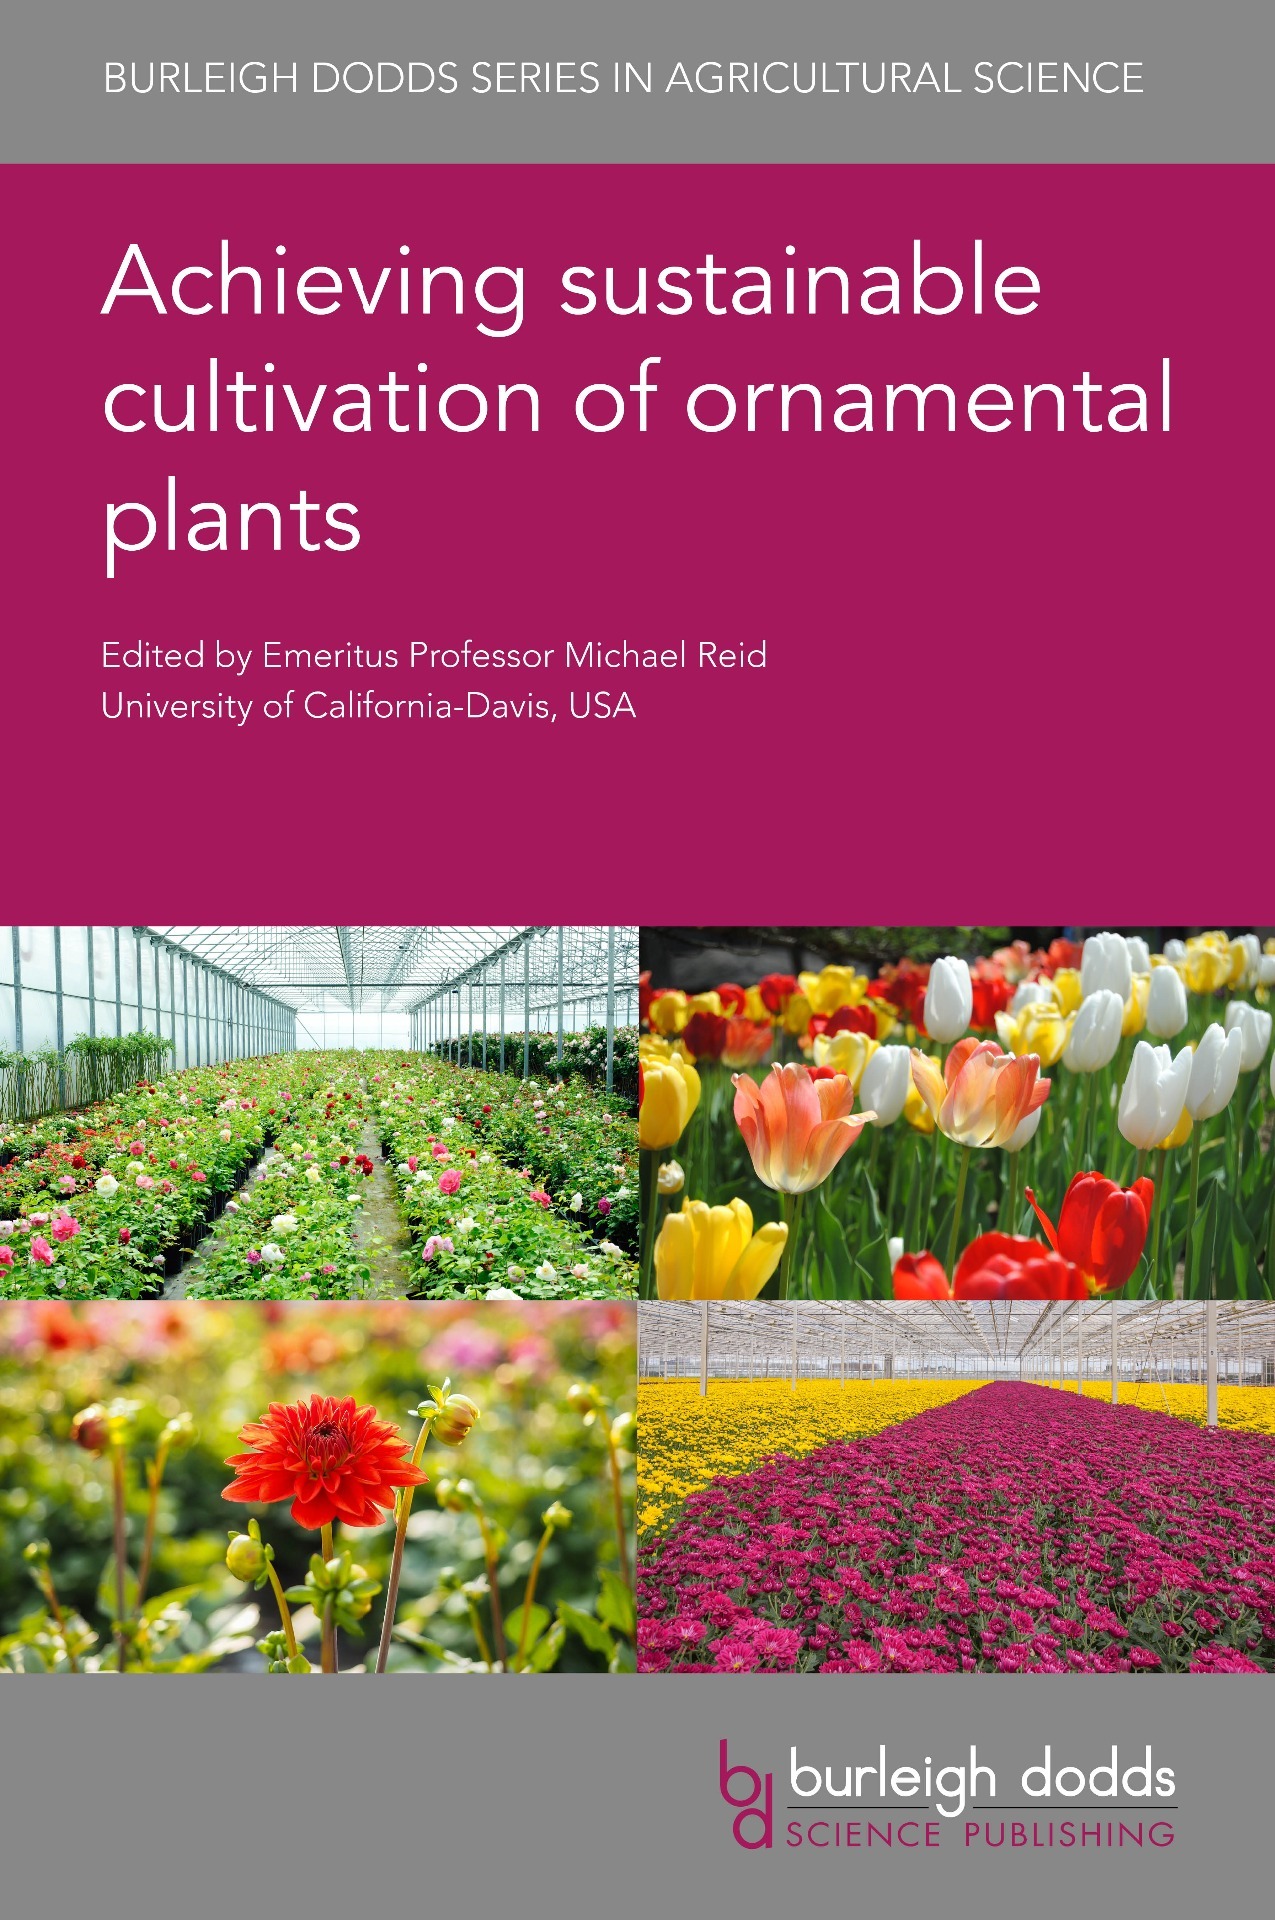 Achieving sustainable cultivation of ornamental plants